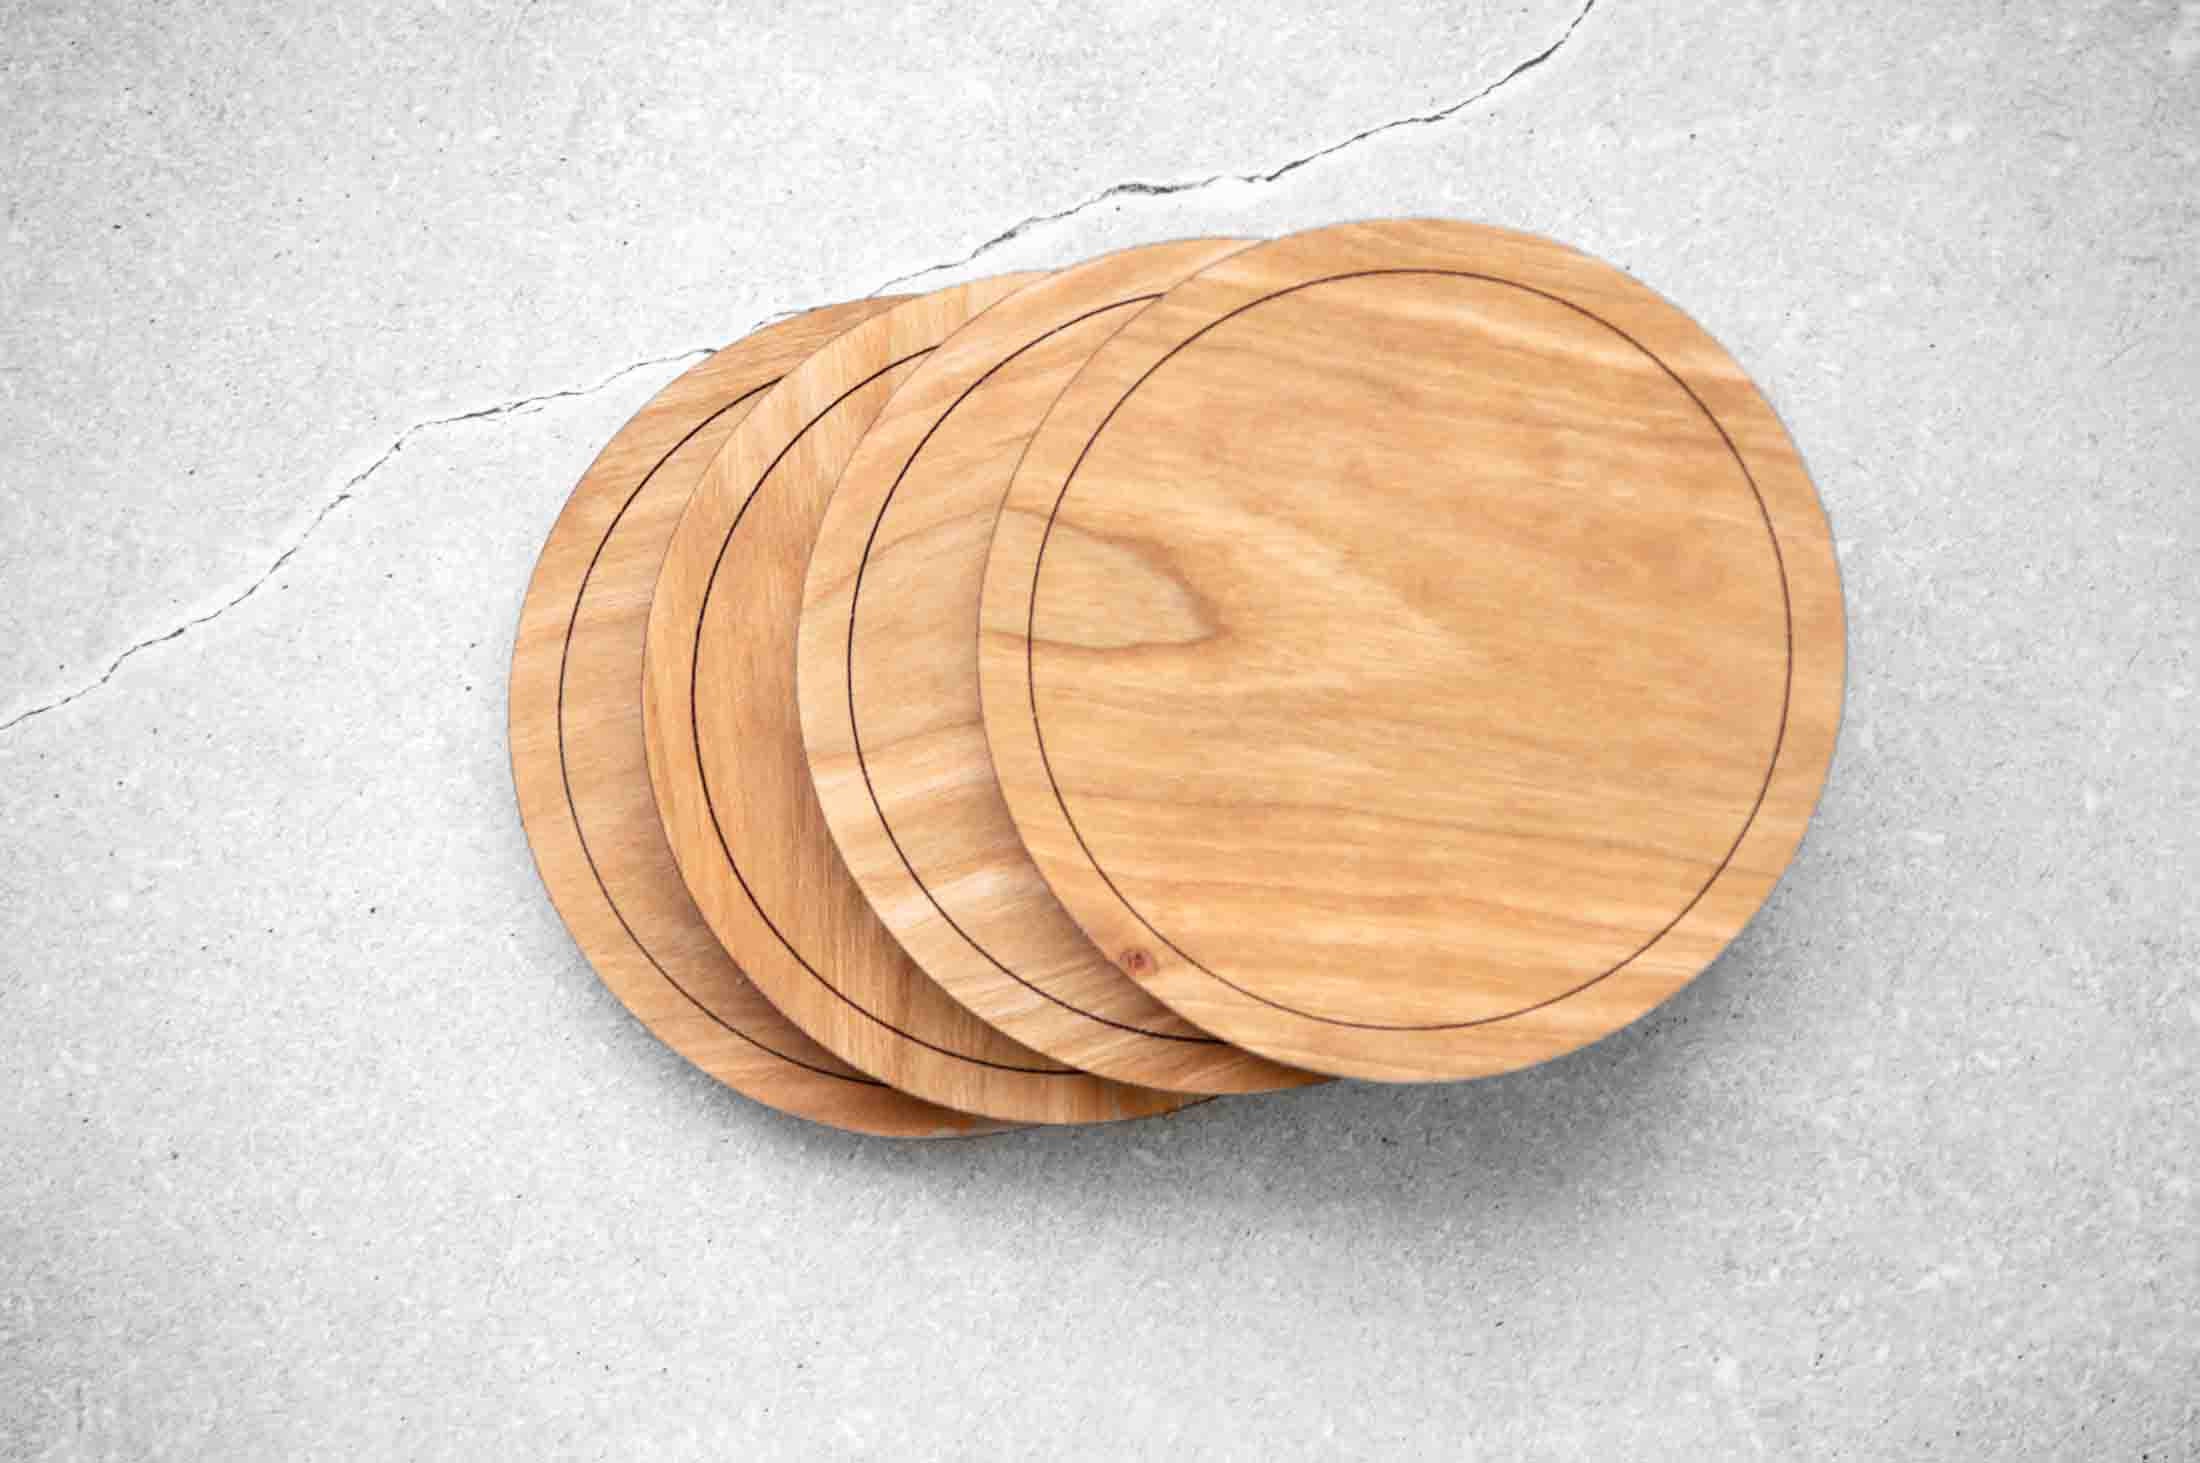 Wood Coaster Set With Holder Solid Wooden Coasters 4 Handmade